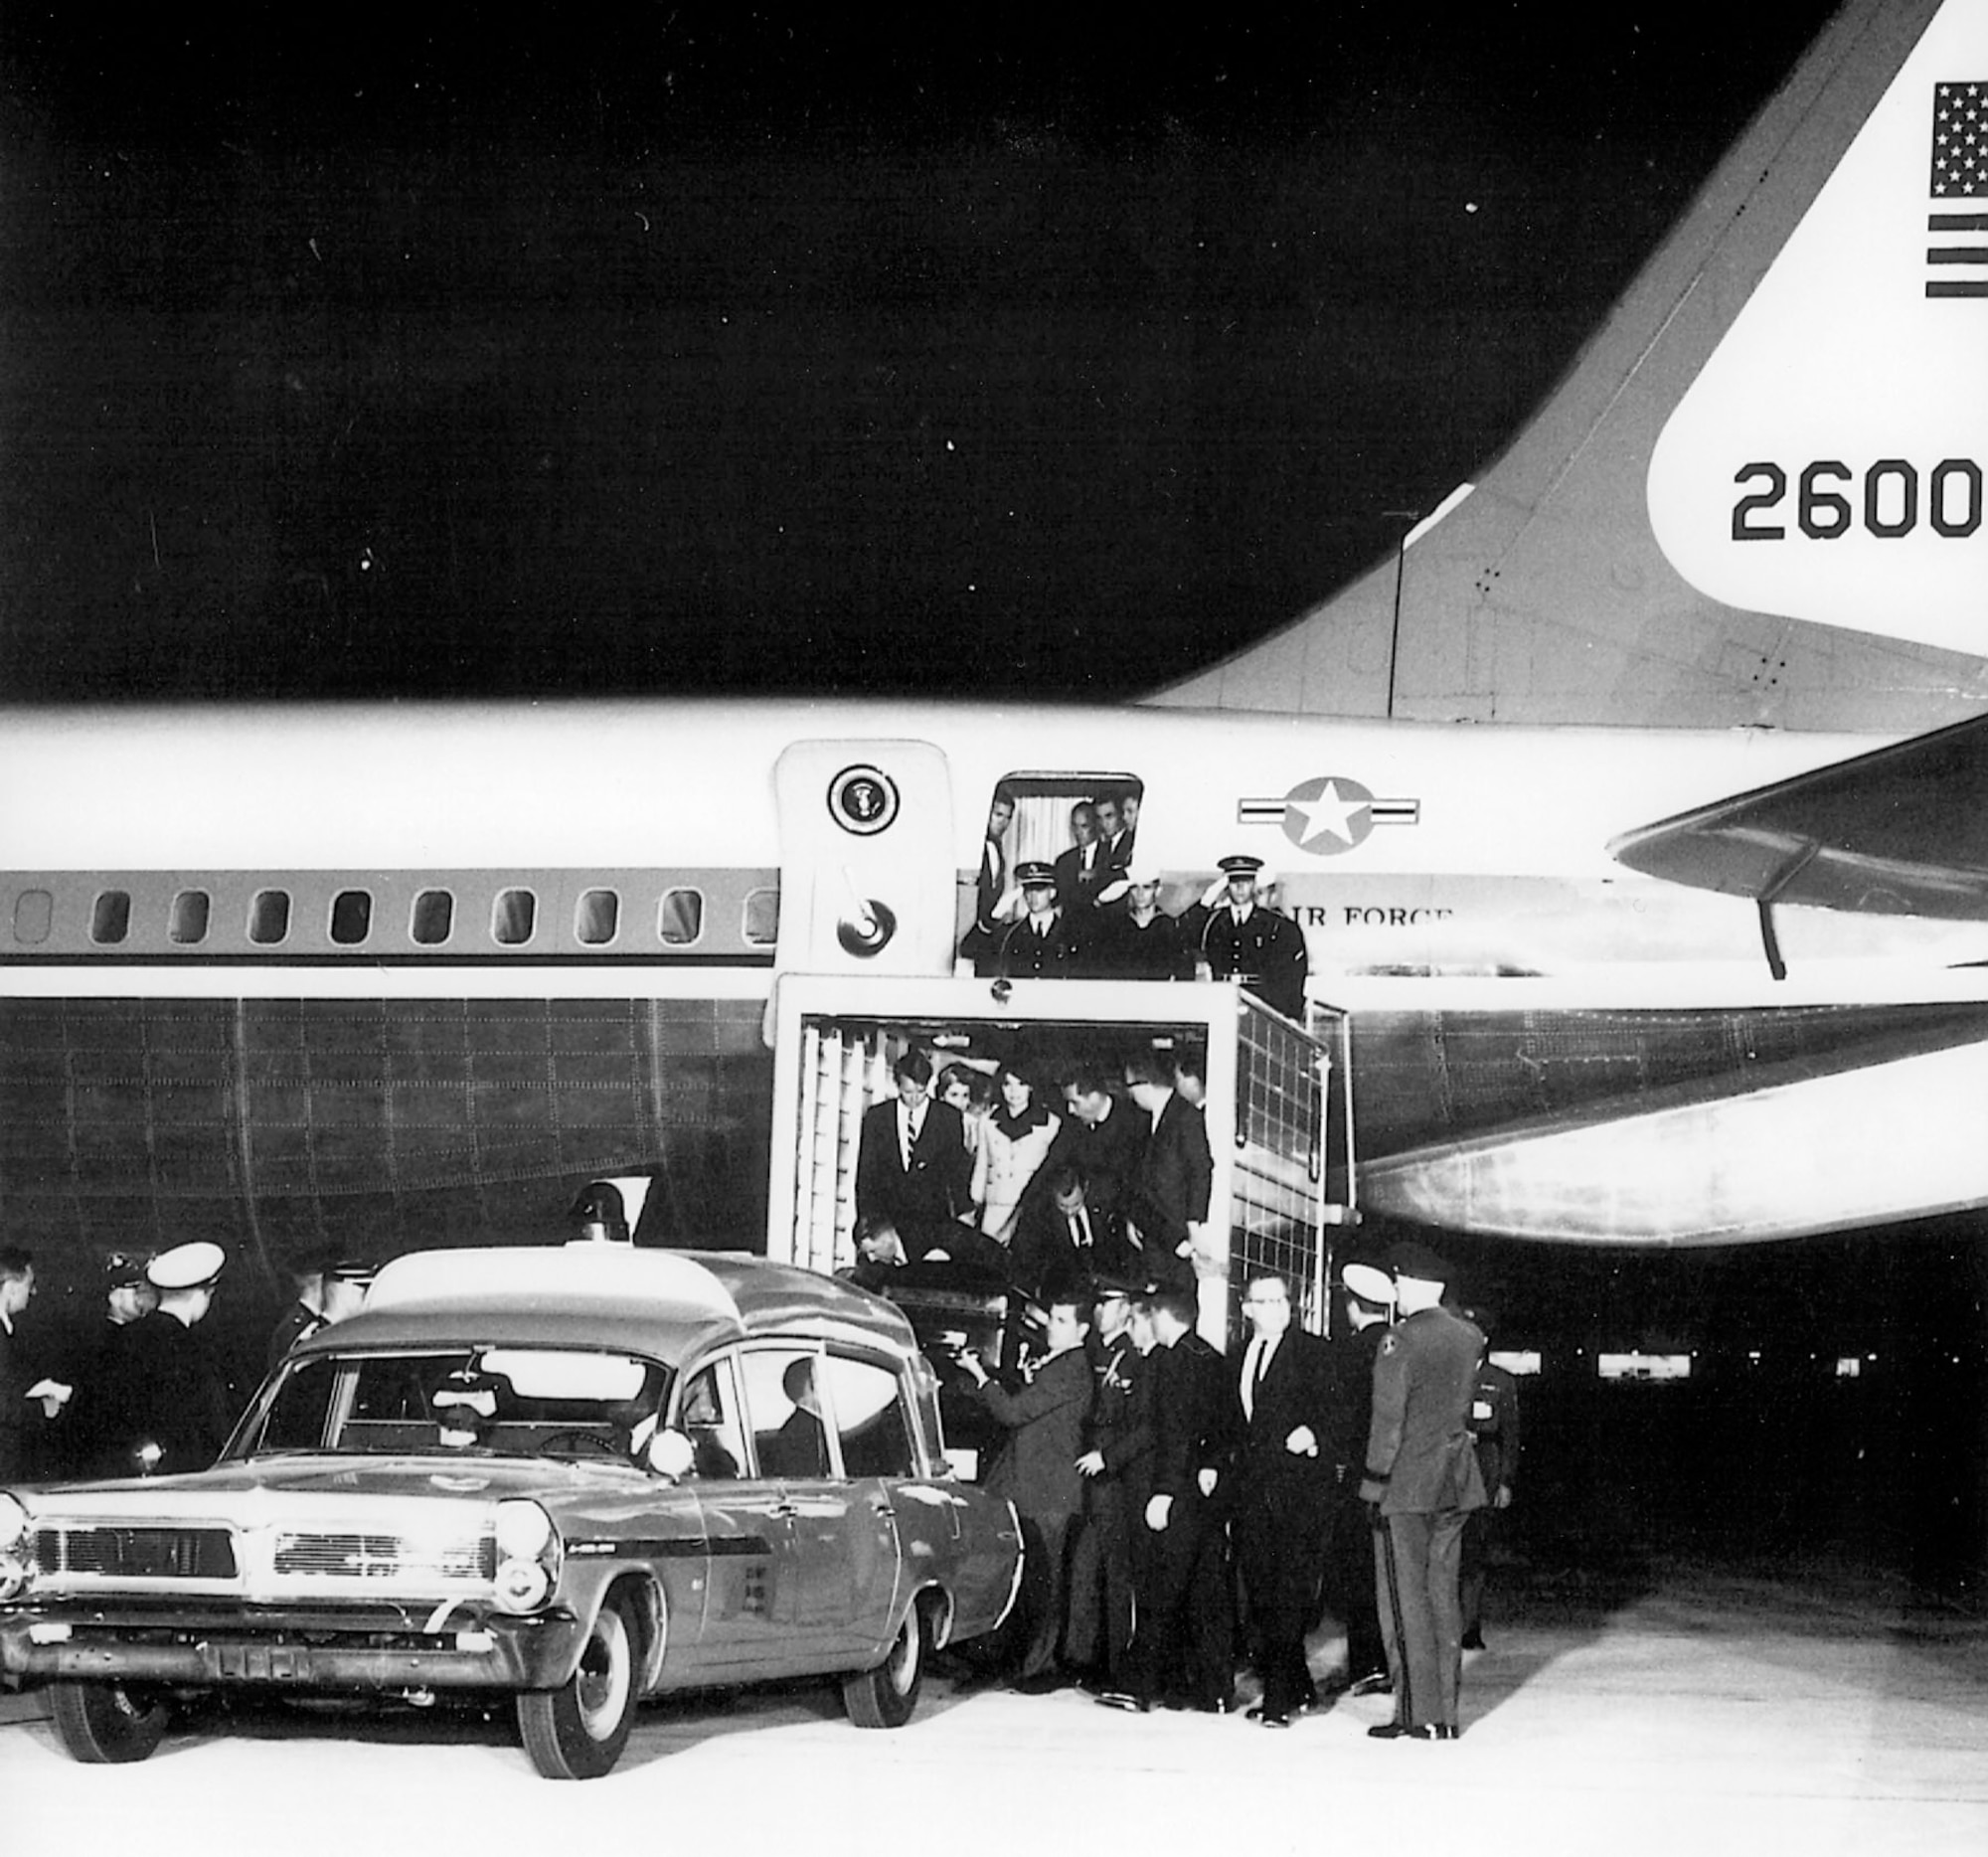 President John F. Kennedy's casket is unloaded from Boeing VC-137C SAM 26000 (Air Force One) after his assassination in Dallas, Texas, in November 1963. (U.S. Air Force photo)